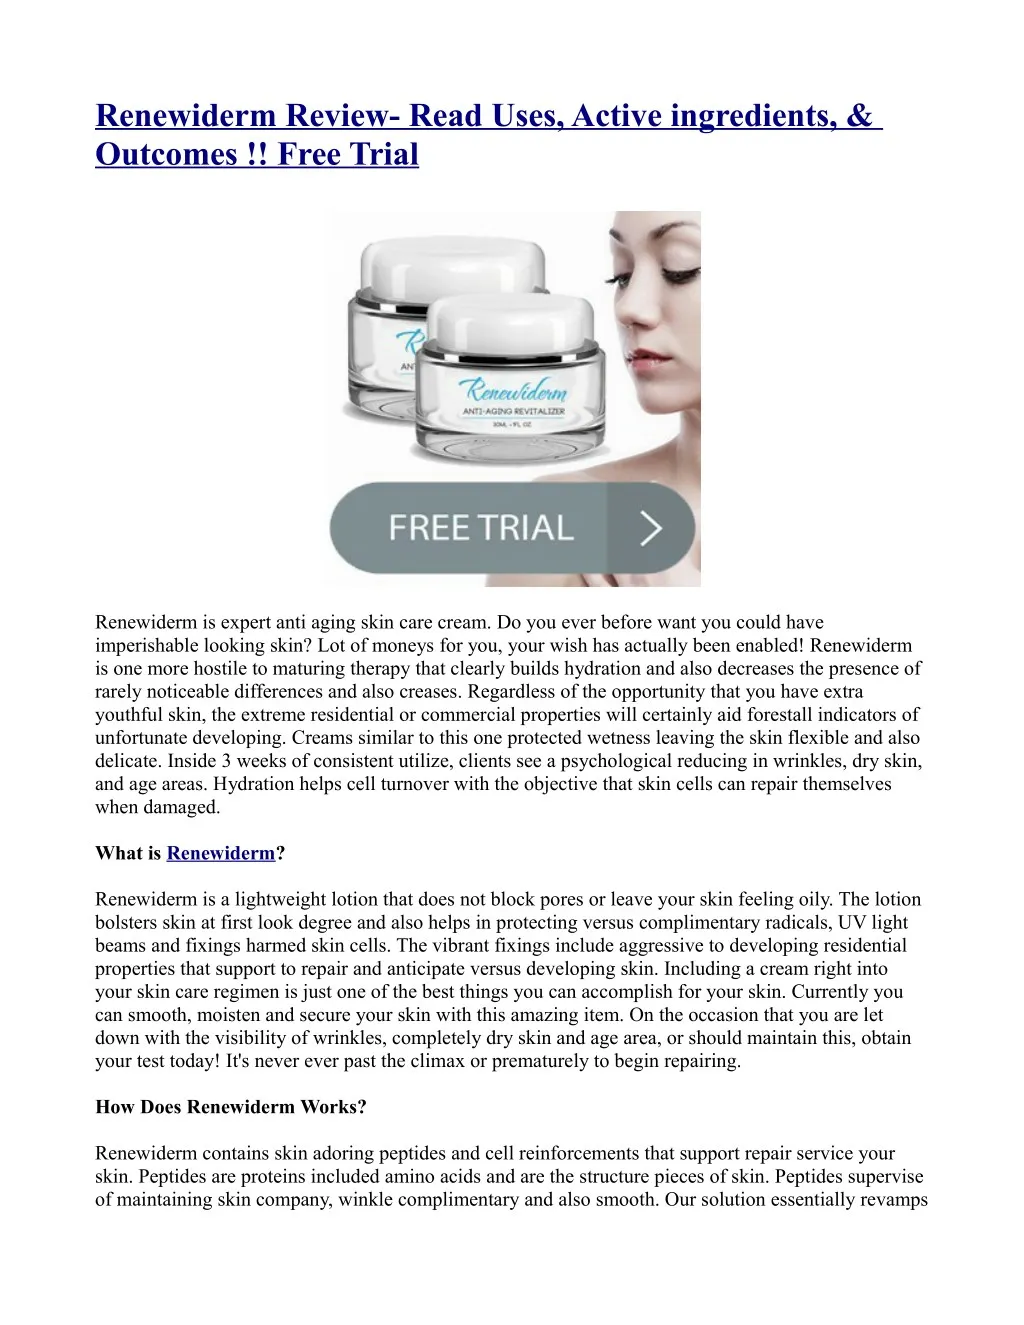 renewiderm review read uses active ingredients